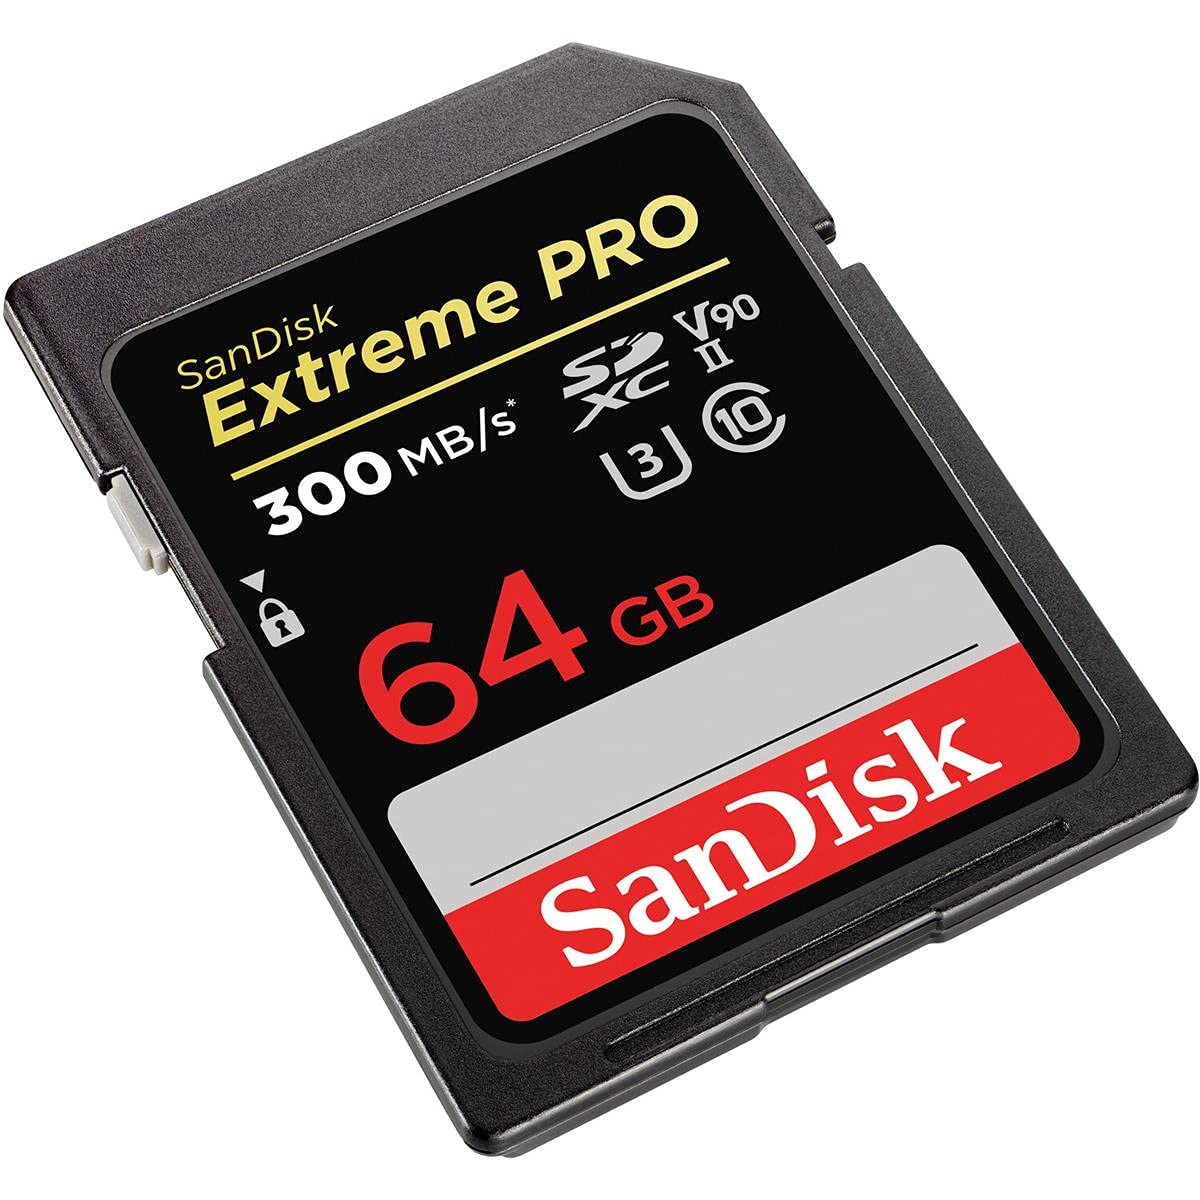 Sandisk Extreme PRO SD UHS-II Card 300 MBPS 64GB